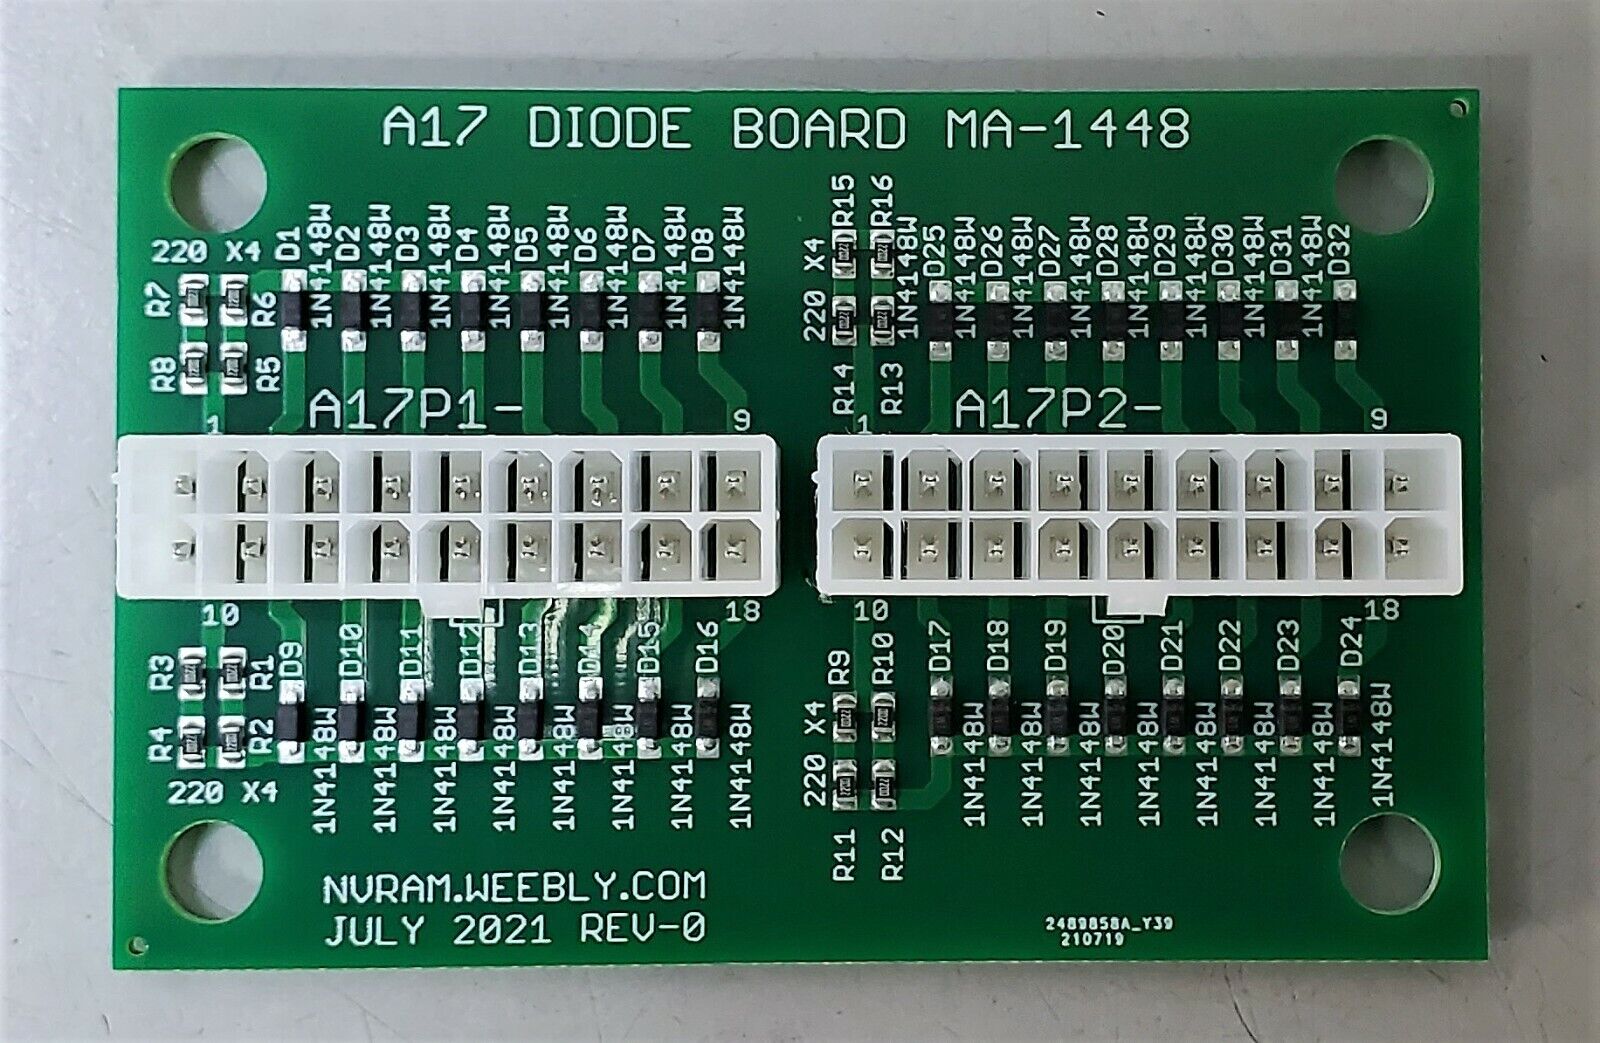 Gottlieb Diode Board A17 MA-1448 Used in Stargate, Freddy, Mario Bros, and more